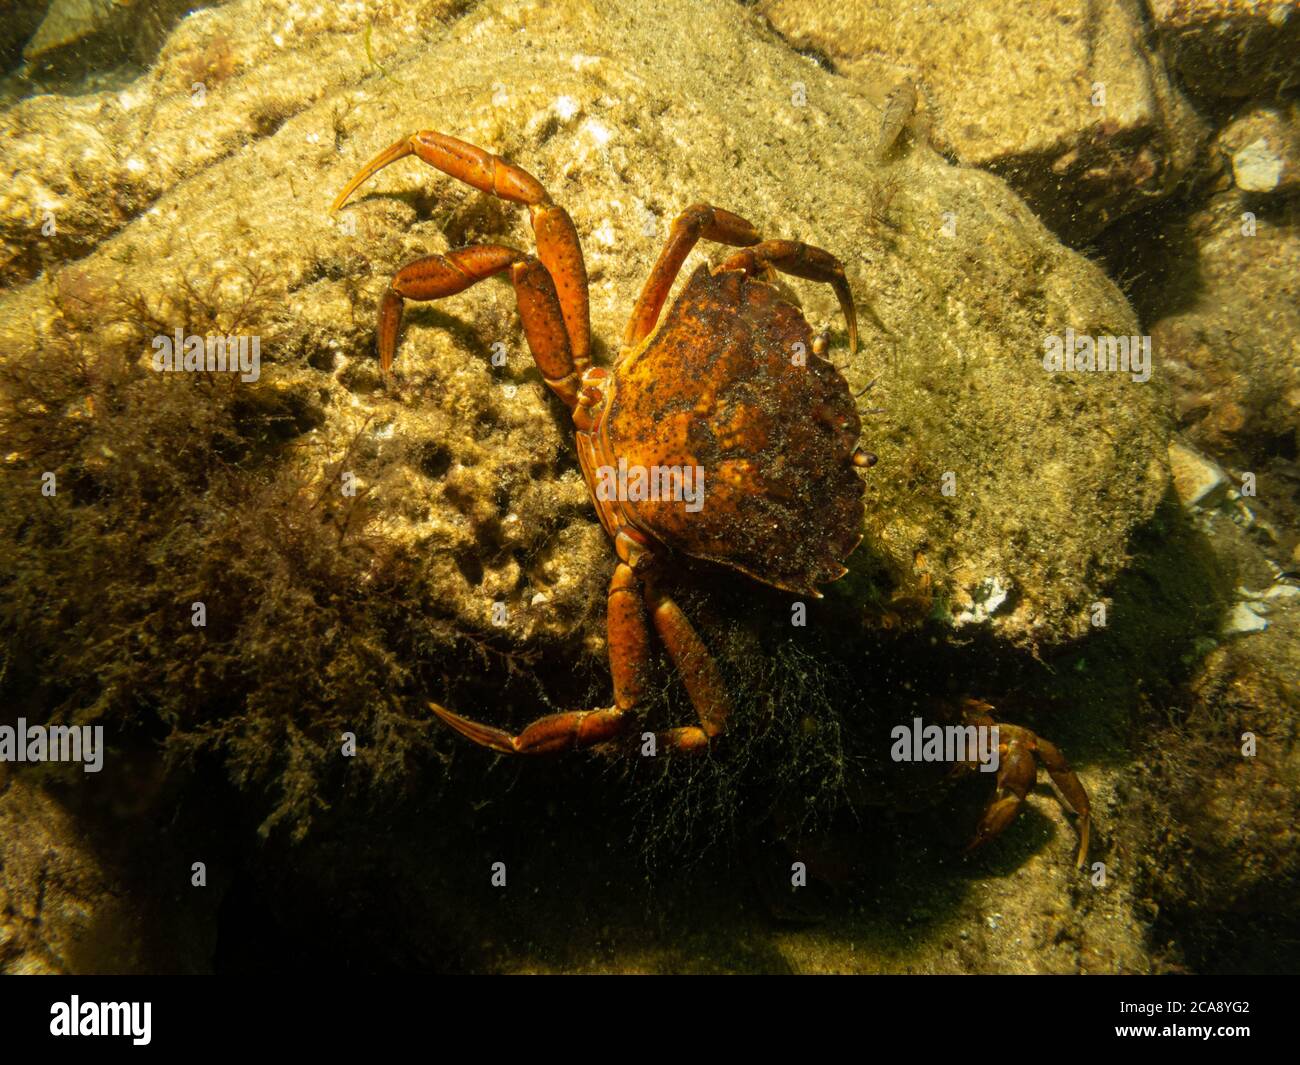 A closeup underwater picture of a crab taking shelter among stones and seaweed. Picture from Oresund, Malmo in southern Sweden. Stock Photo